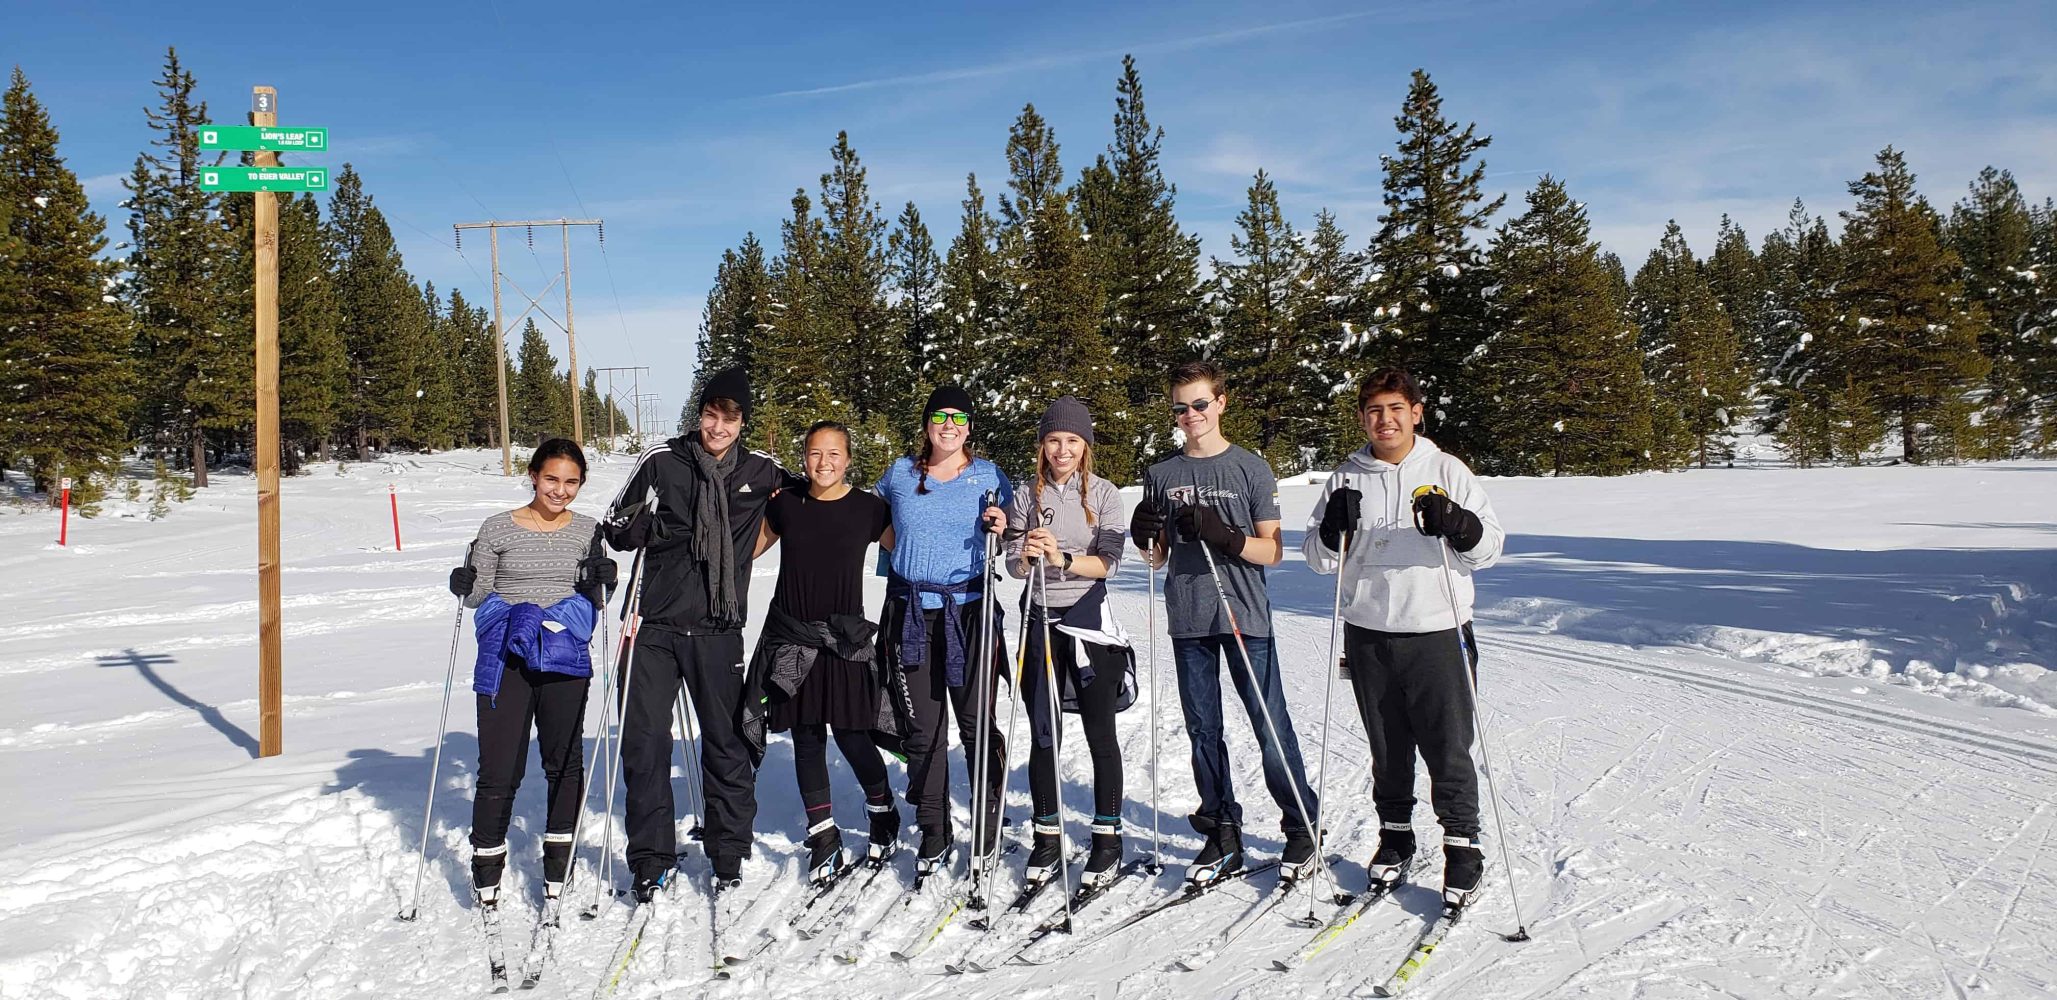 students on skis get their picture taken